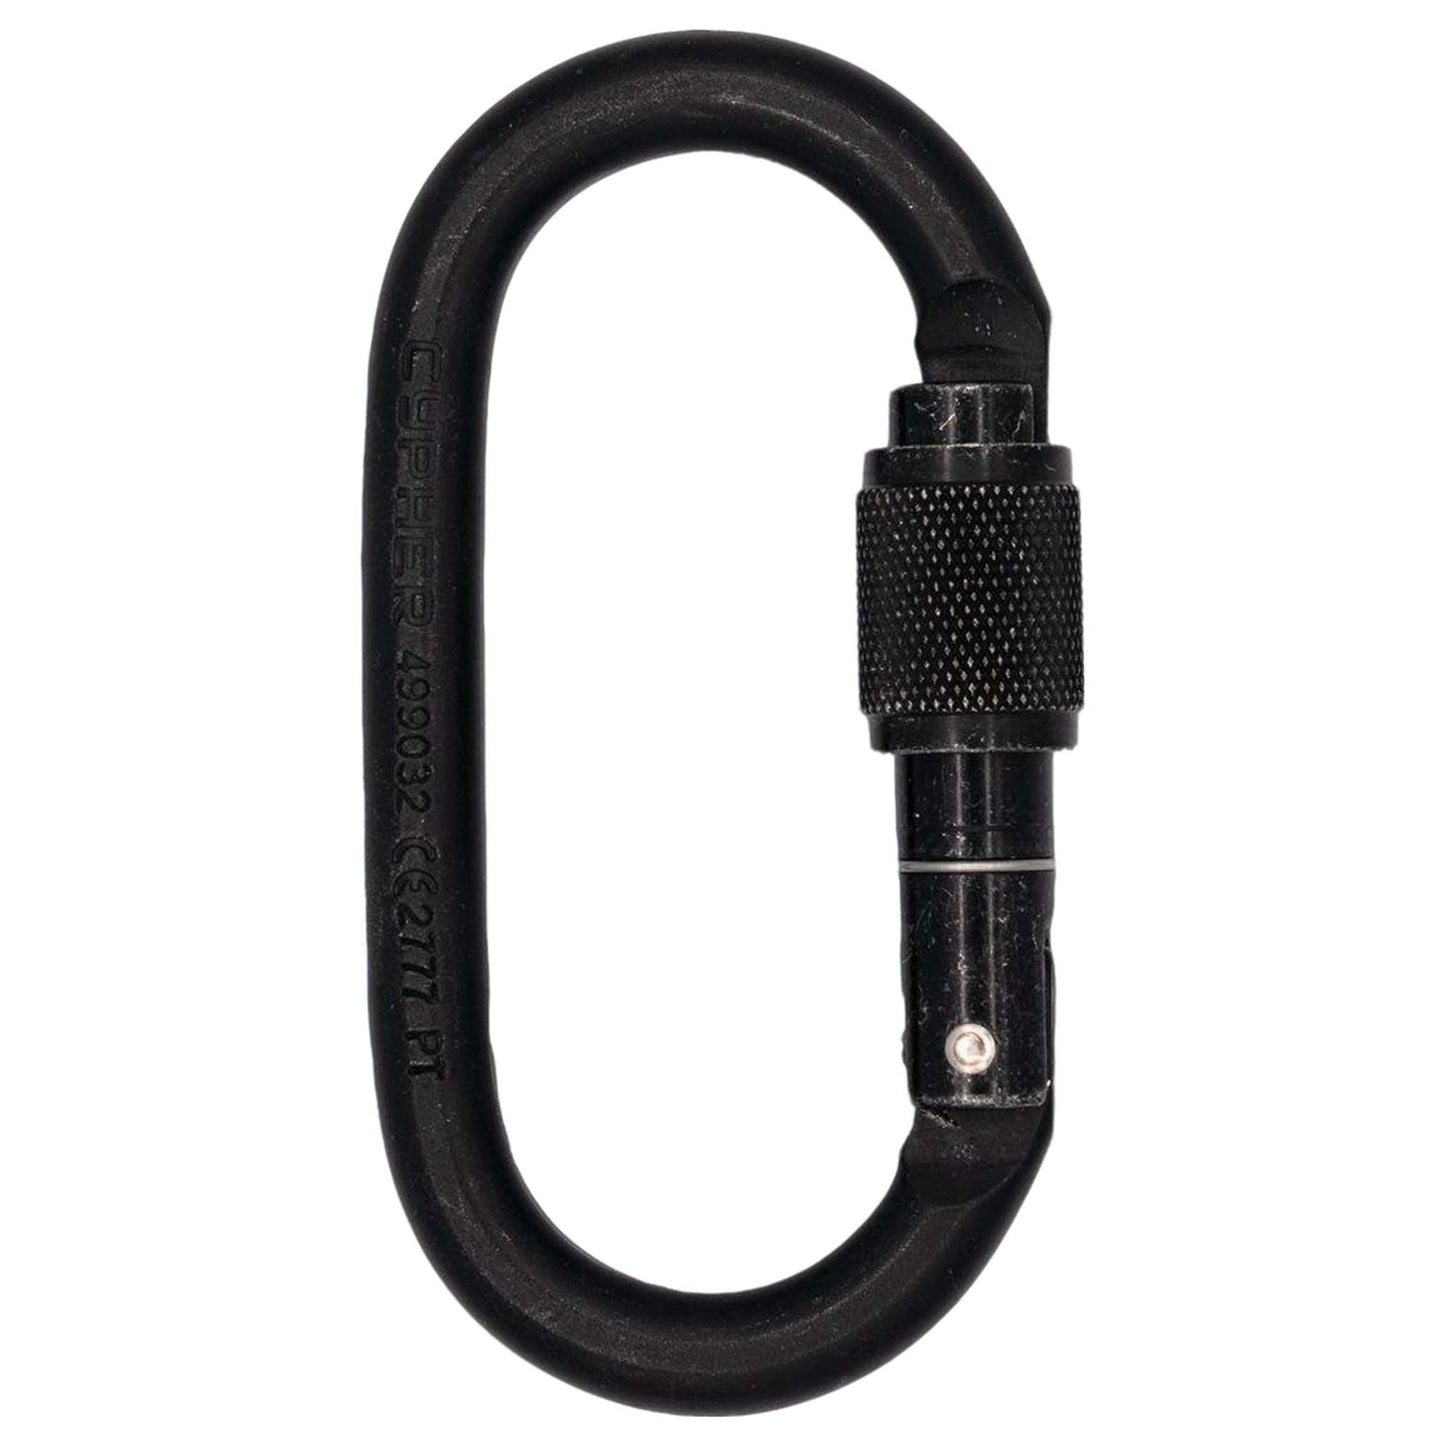 G SERIES OVAL SG KEYLOCK Carabiner - The Climber's Choice for Secure, Snag-Free Operation